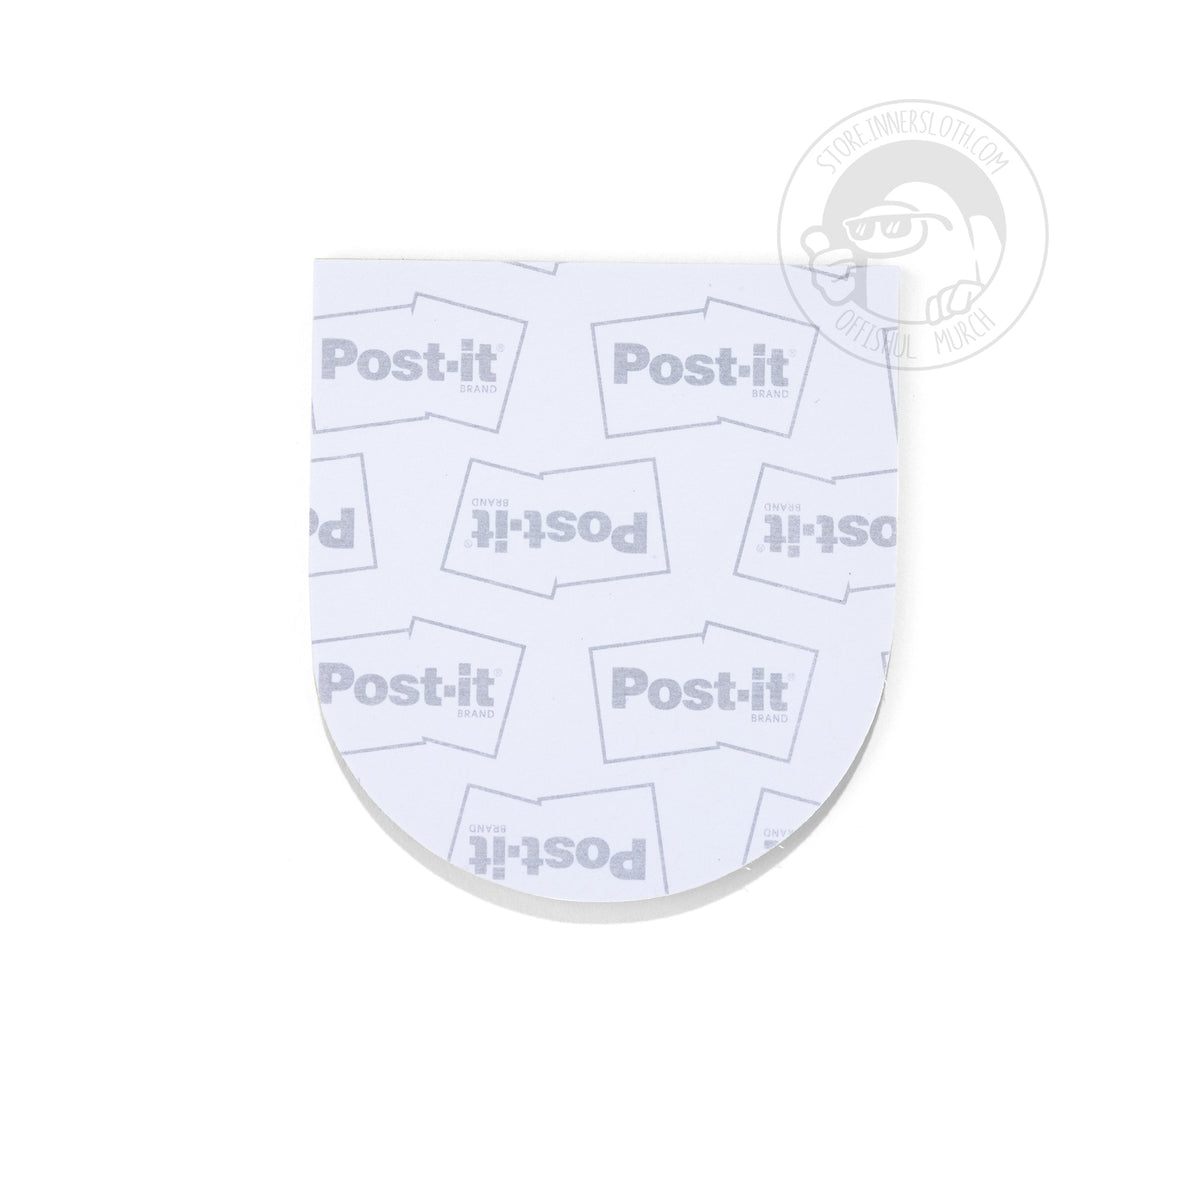 Among Us: Crewmate Post-It® Notes